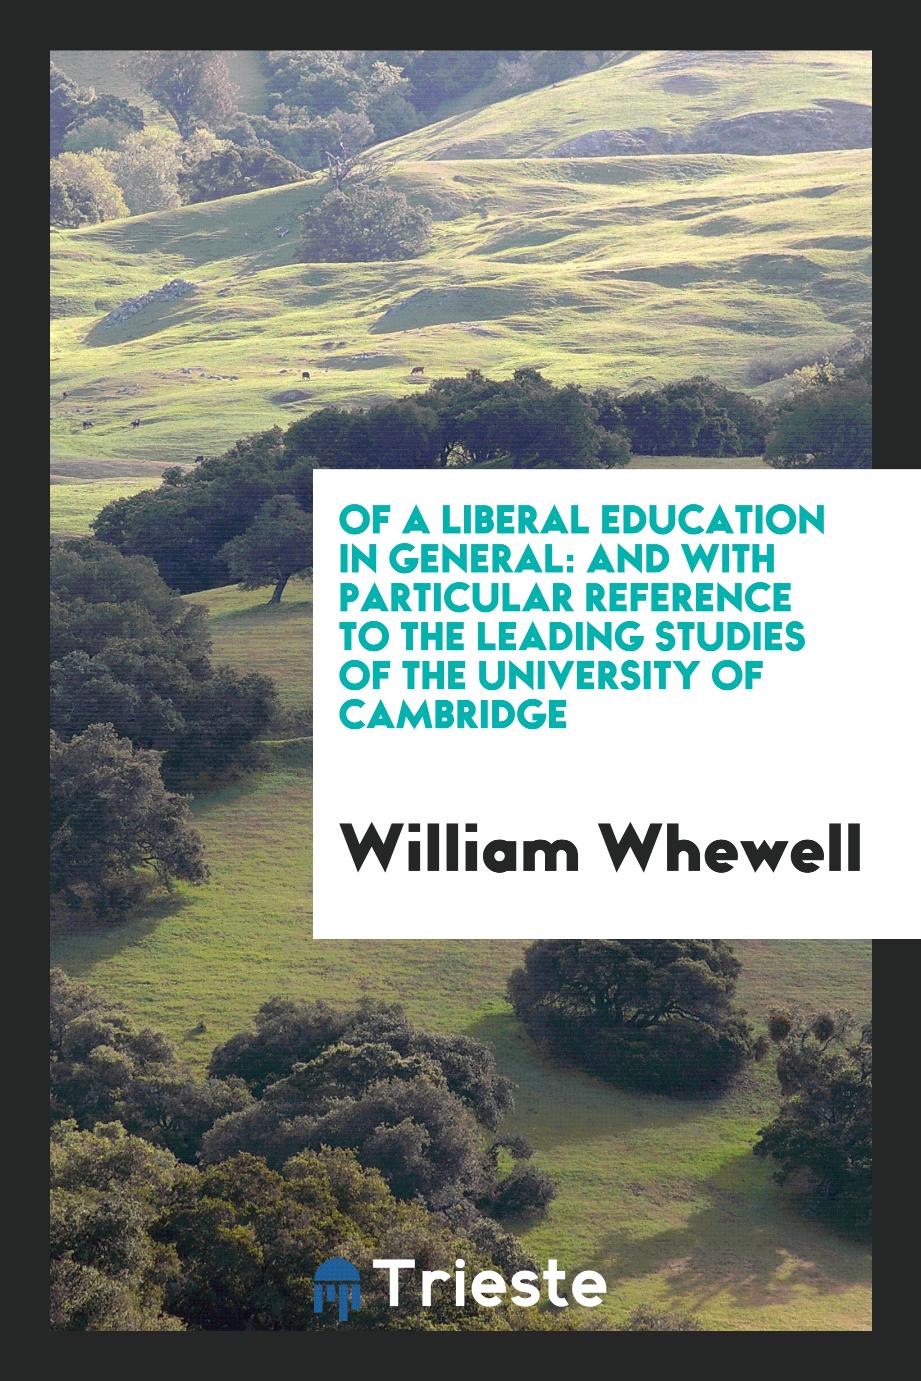 Of a liberal education in general: and with particular reference to the leading studies of the University of Cambridge